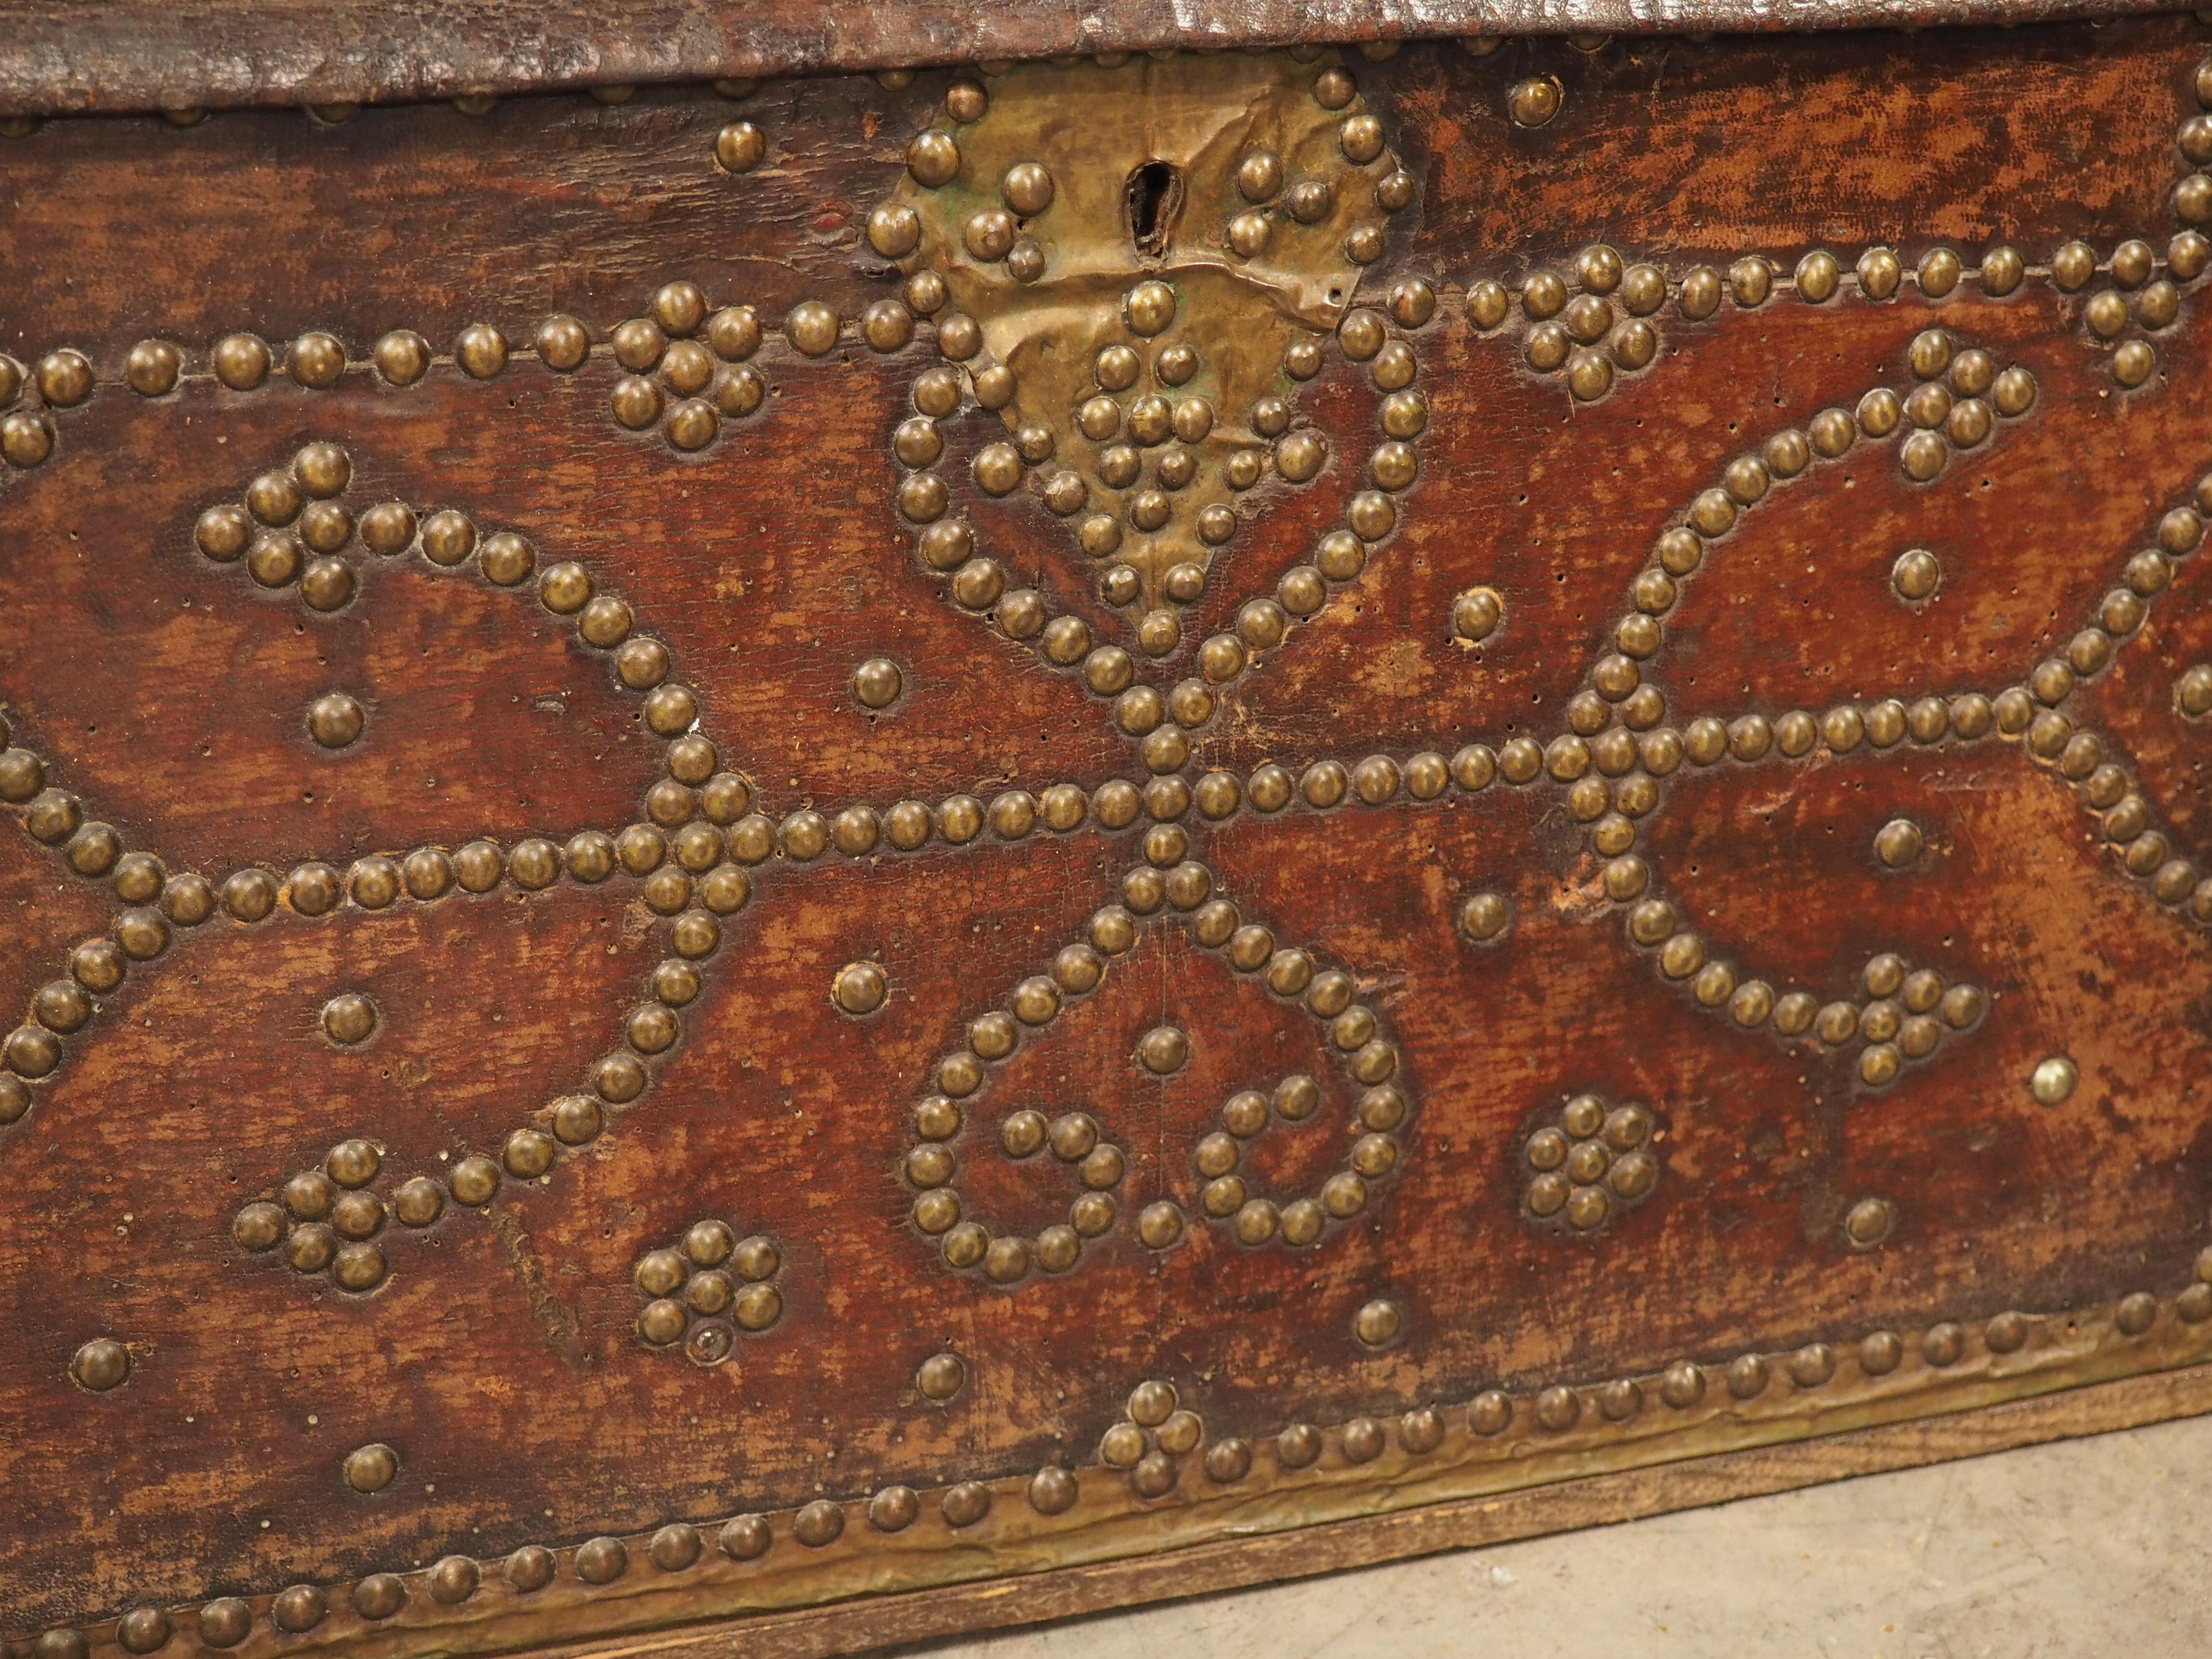 Hand-Carved 18th Century Domed and Studded Leather, Brass, and Wood Trunk from France For Sale